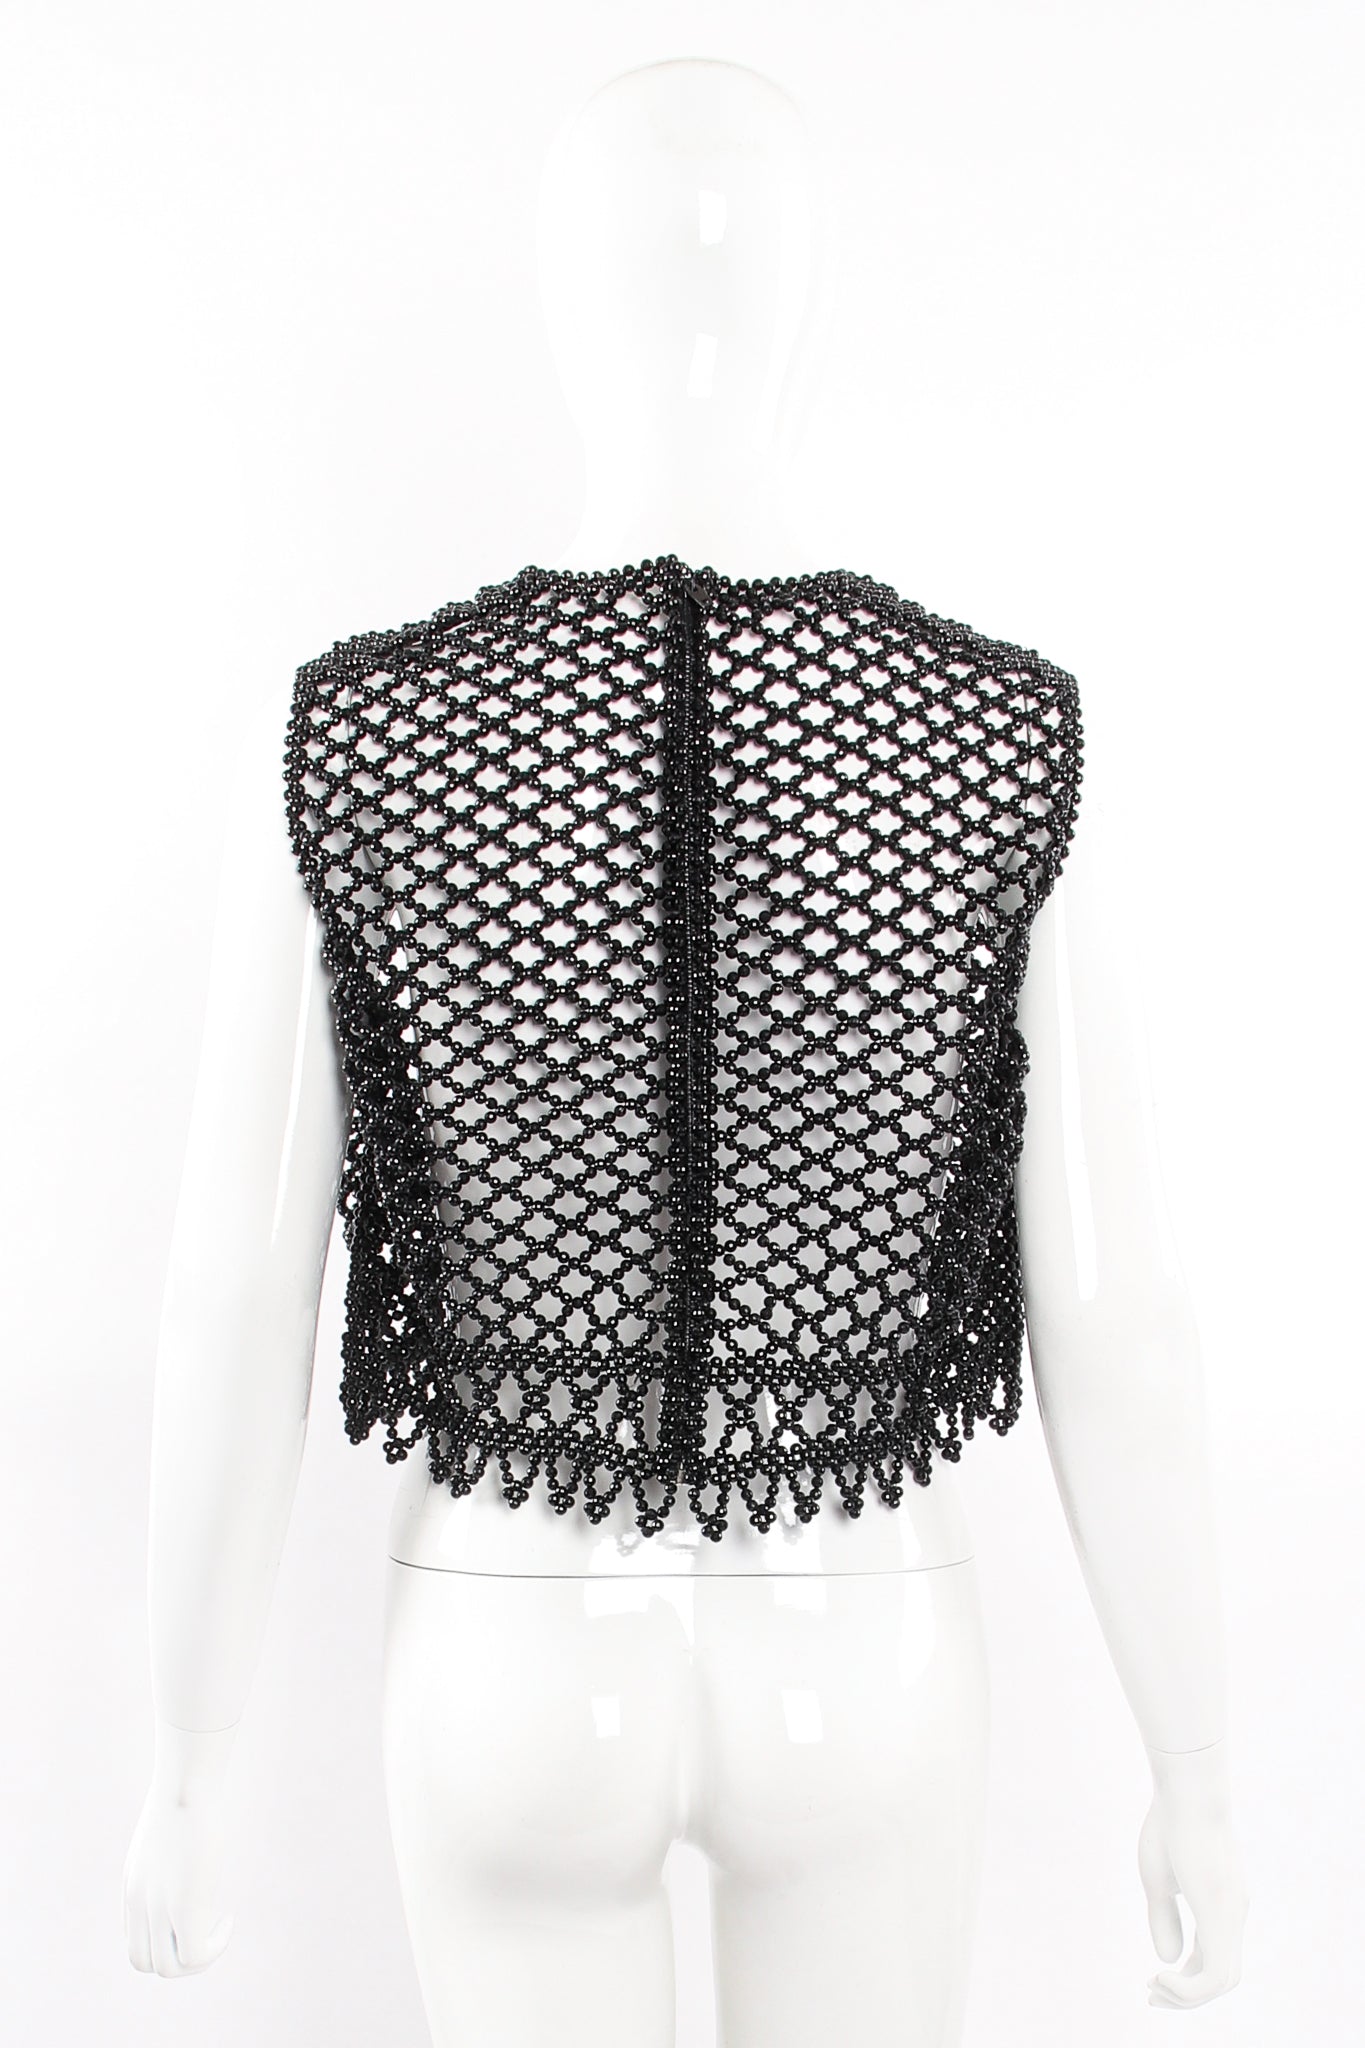 Vintage 60s Bead Mesh Boxy Top on Mannequin back at Recess Los Angeles